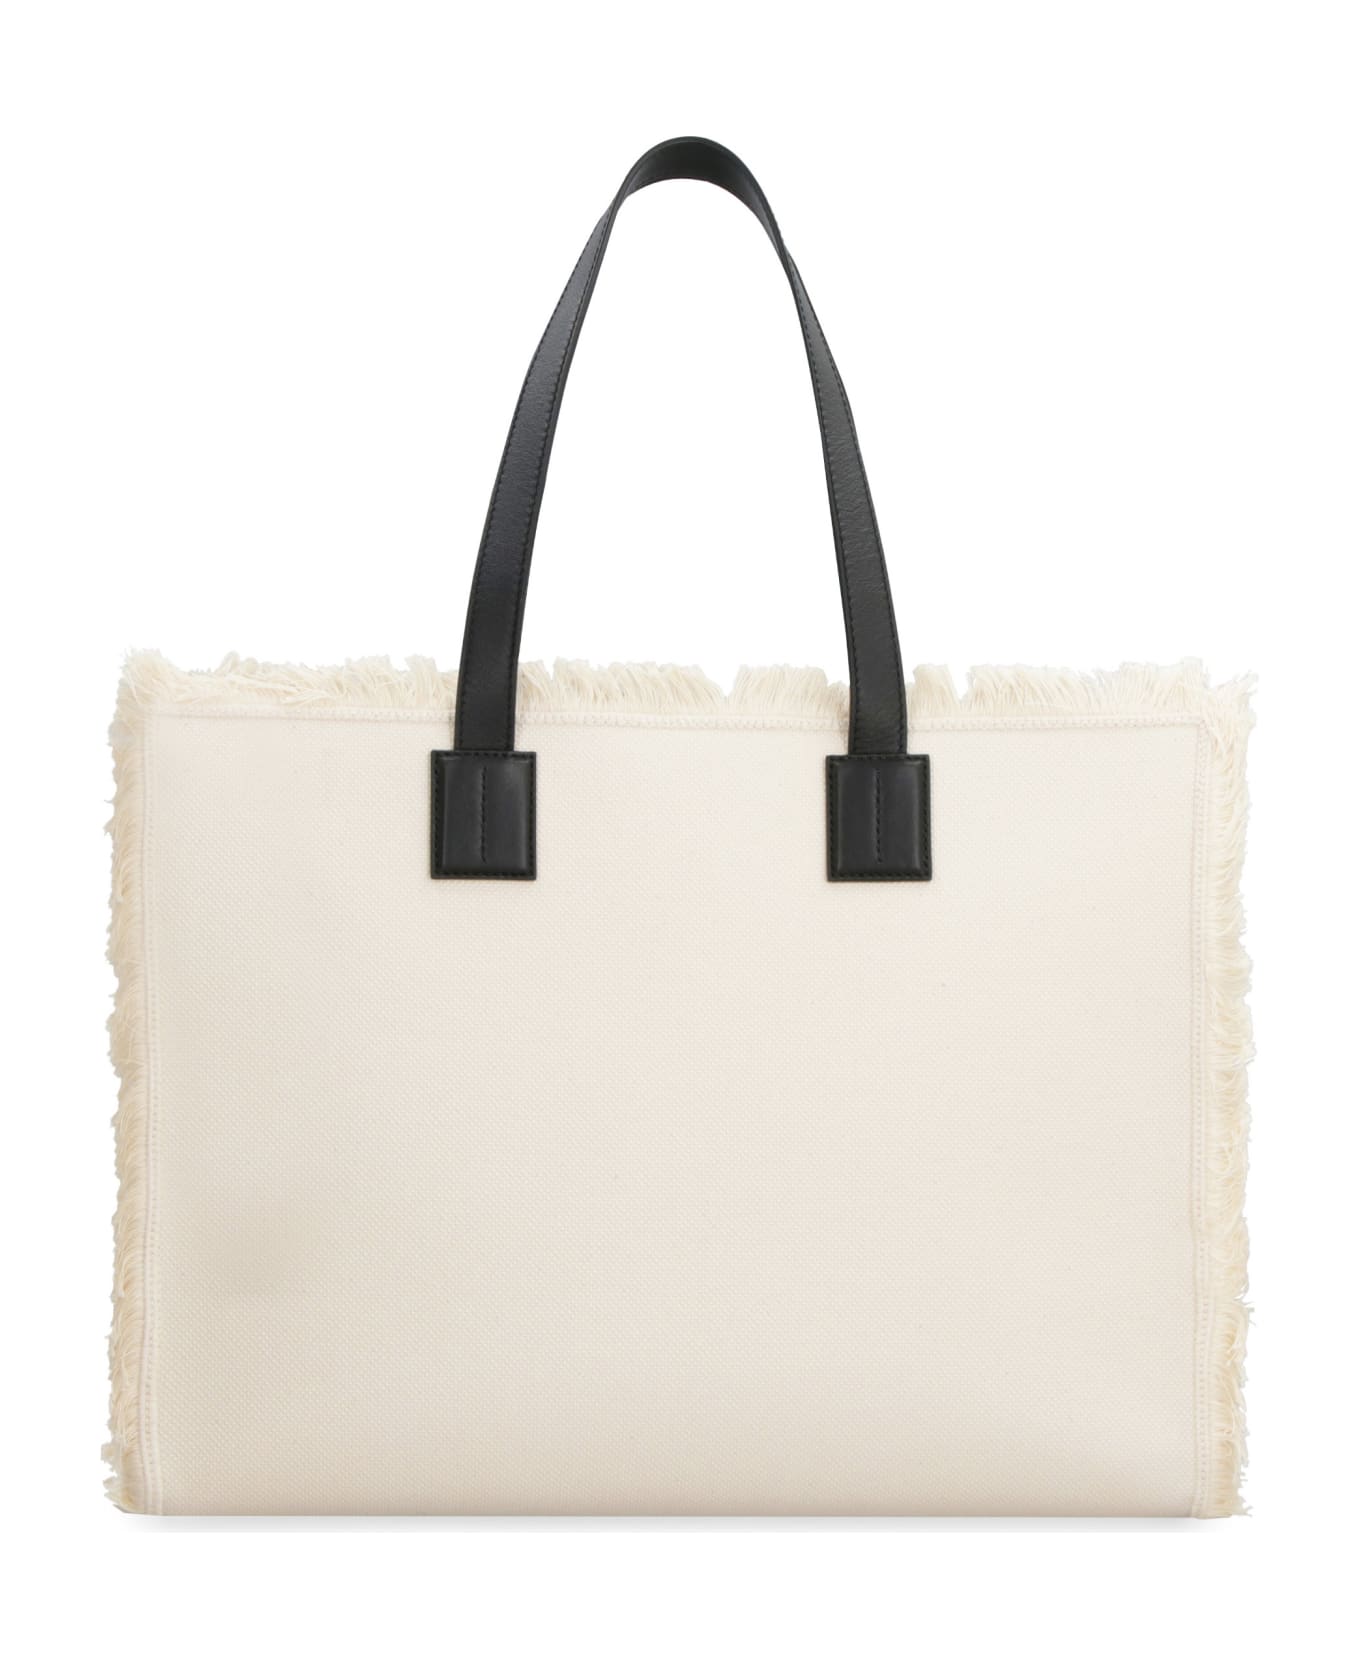 Bally Crystaliaew Canvas And Leather Shopping Bag トートバッグ